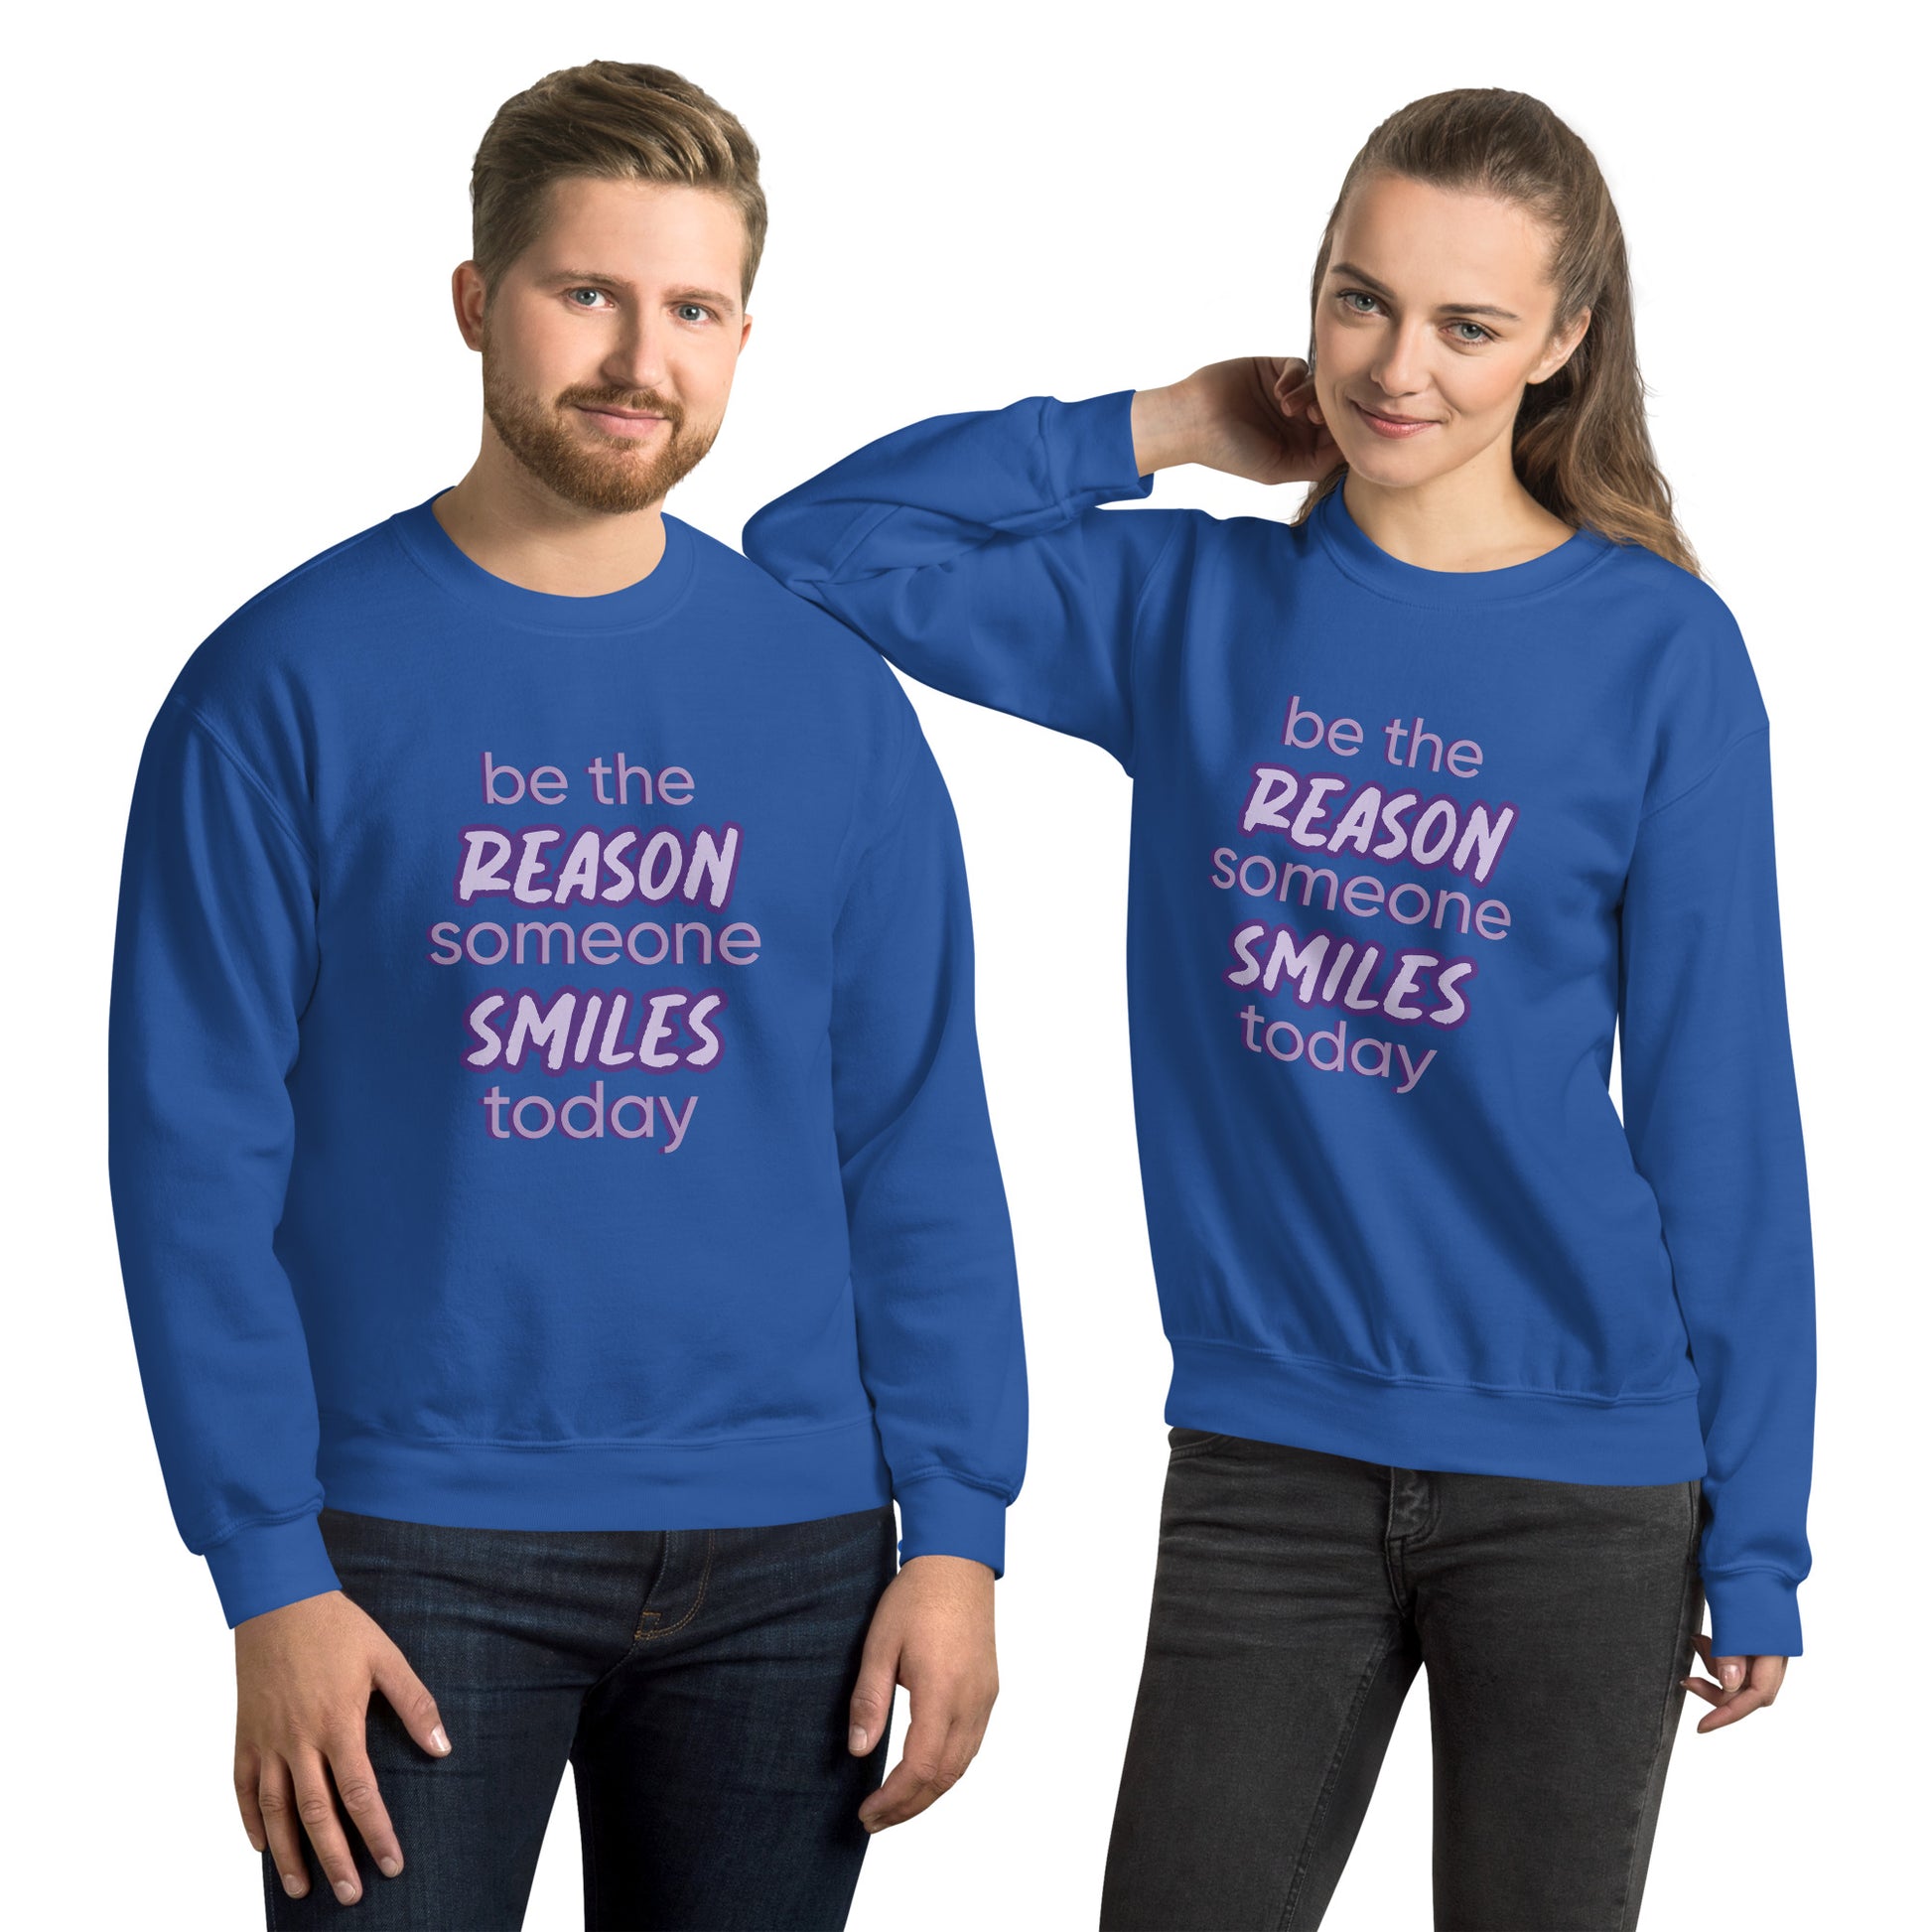 Men and women with royal blue sweater and the quote "be the reason someone smiles today" in purple on it. 